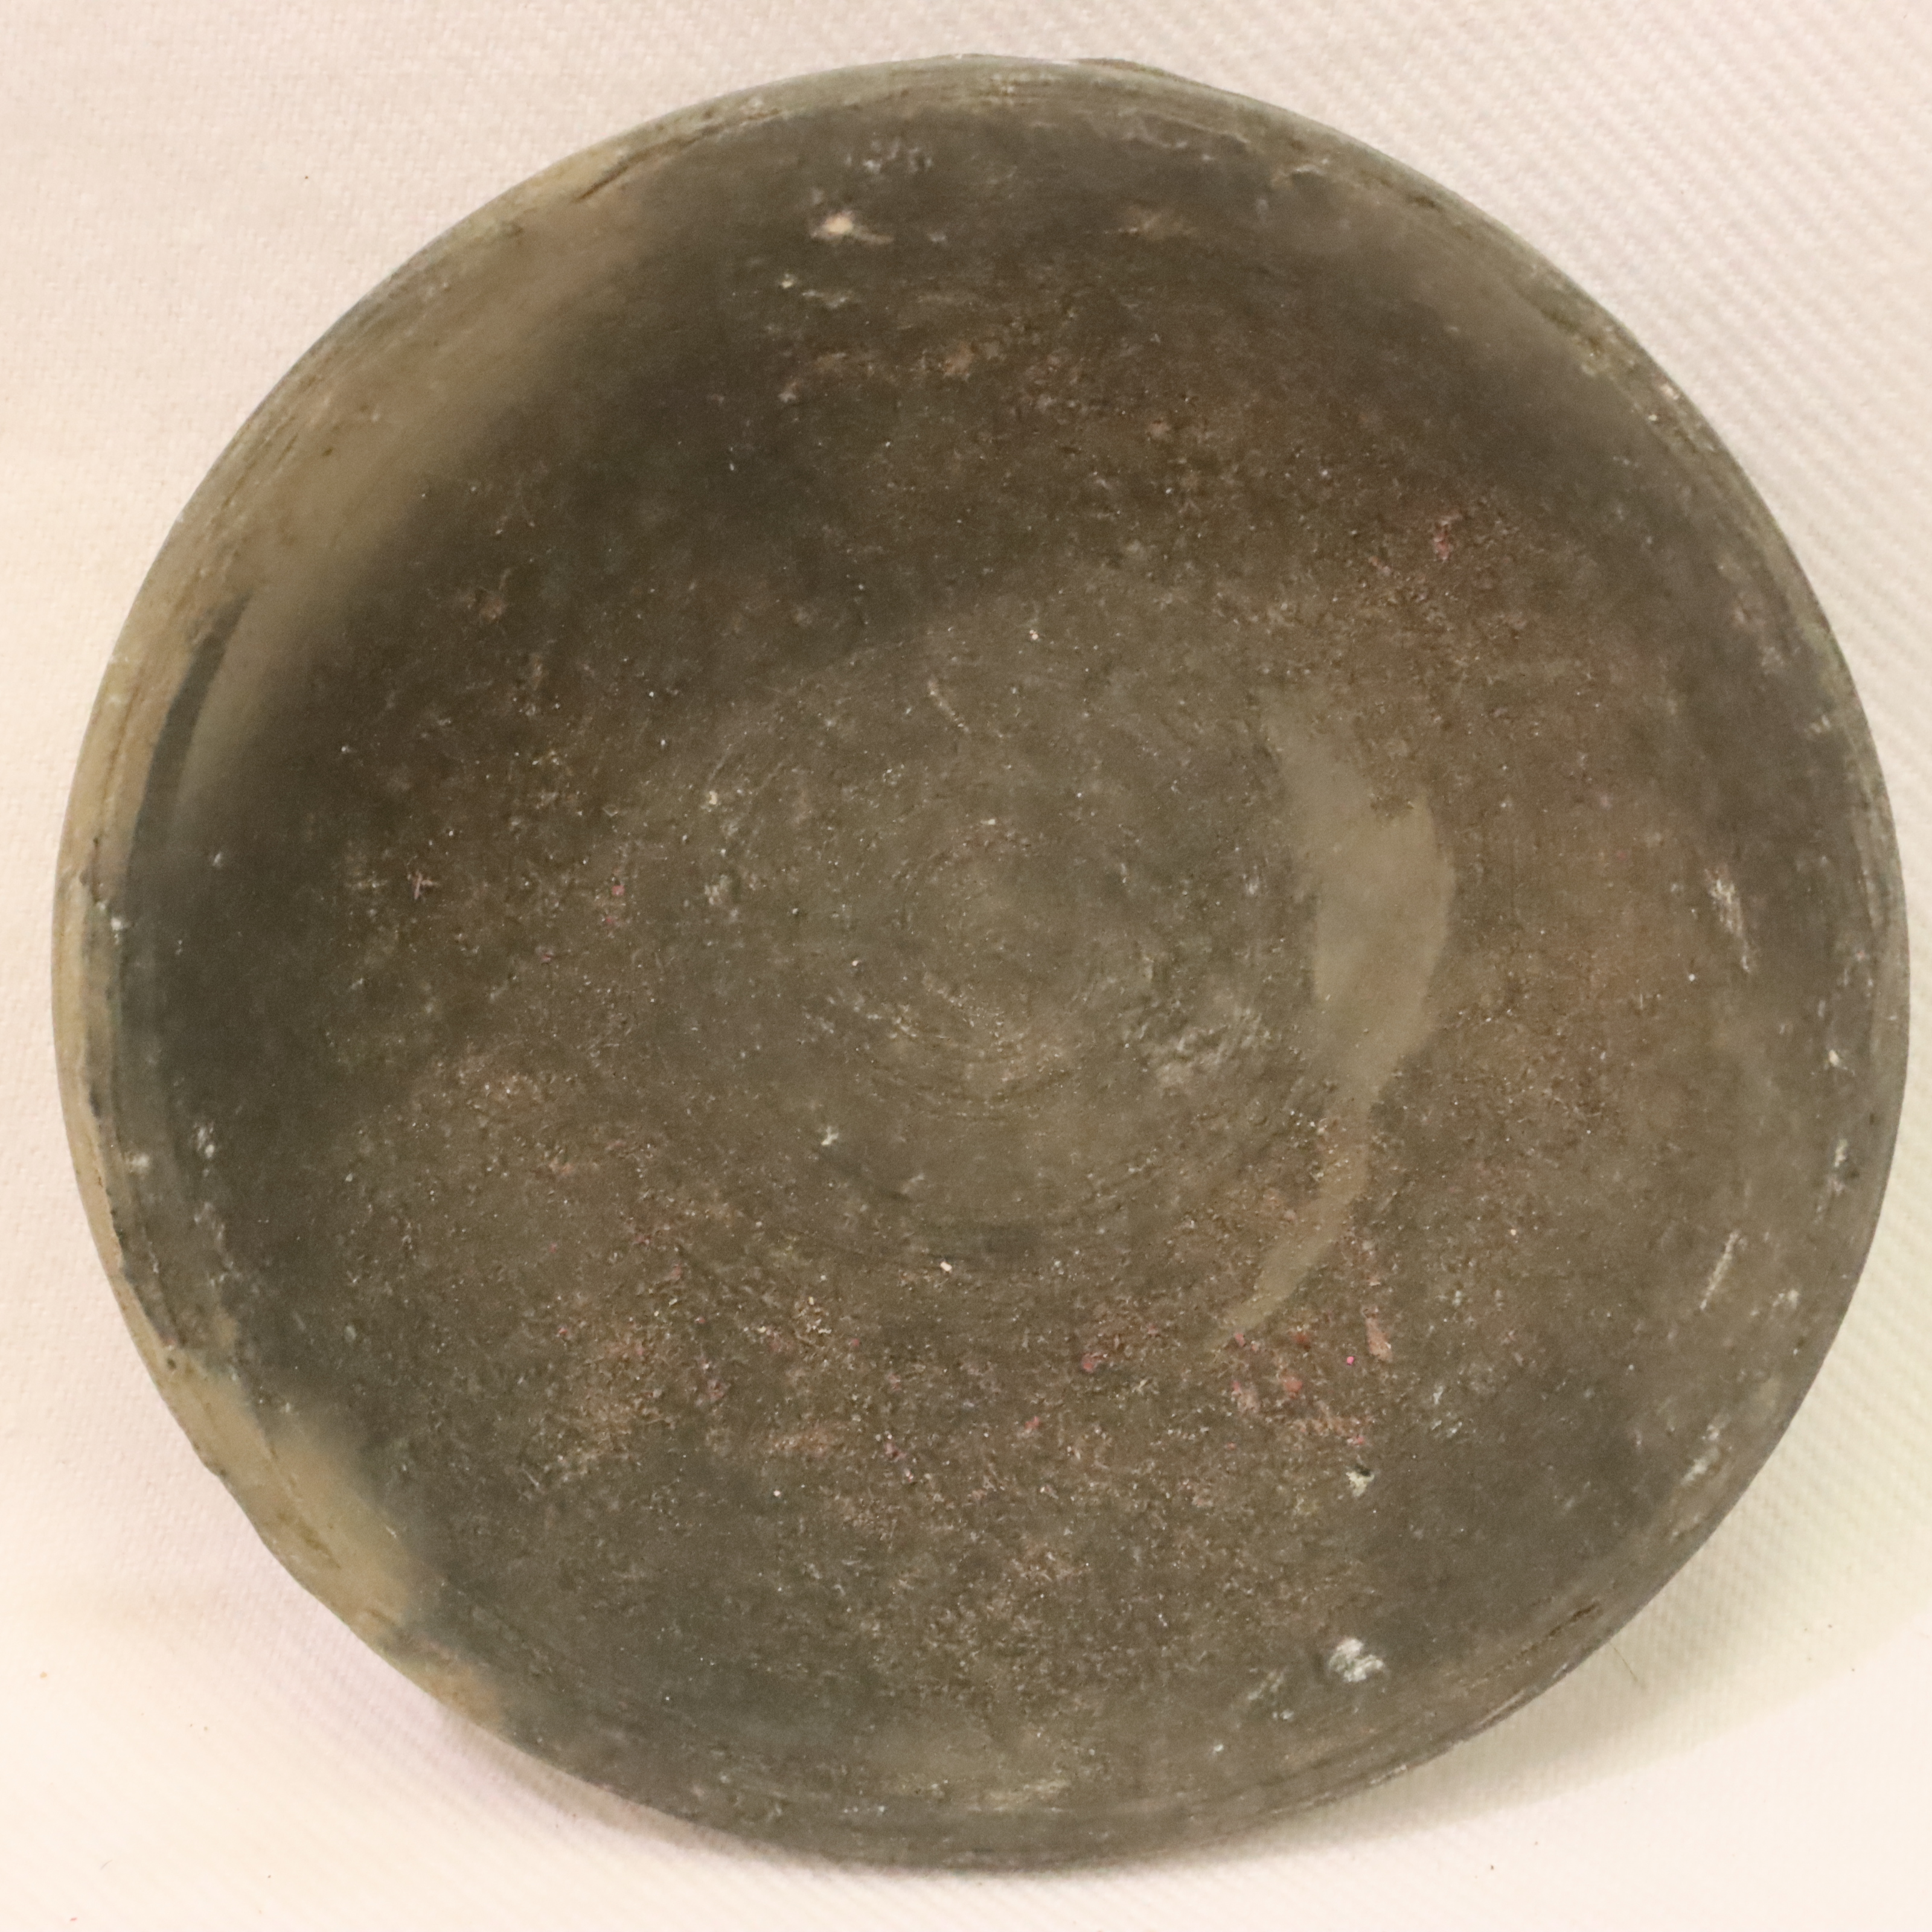 Chinese Song Dynasty blackened clay shallow bowl, D: 82 mm. P&P Group 2 (£18+VAT for the first lot - Image 2 of 4